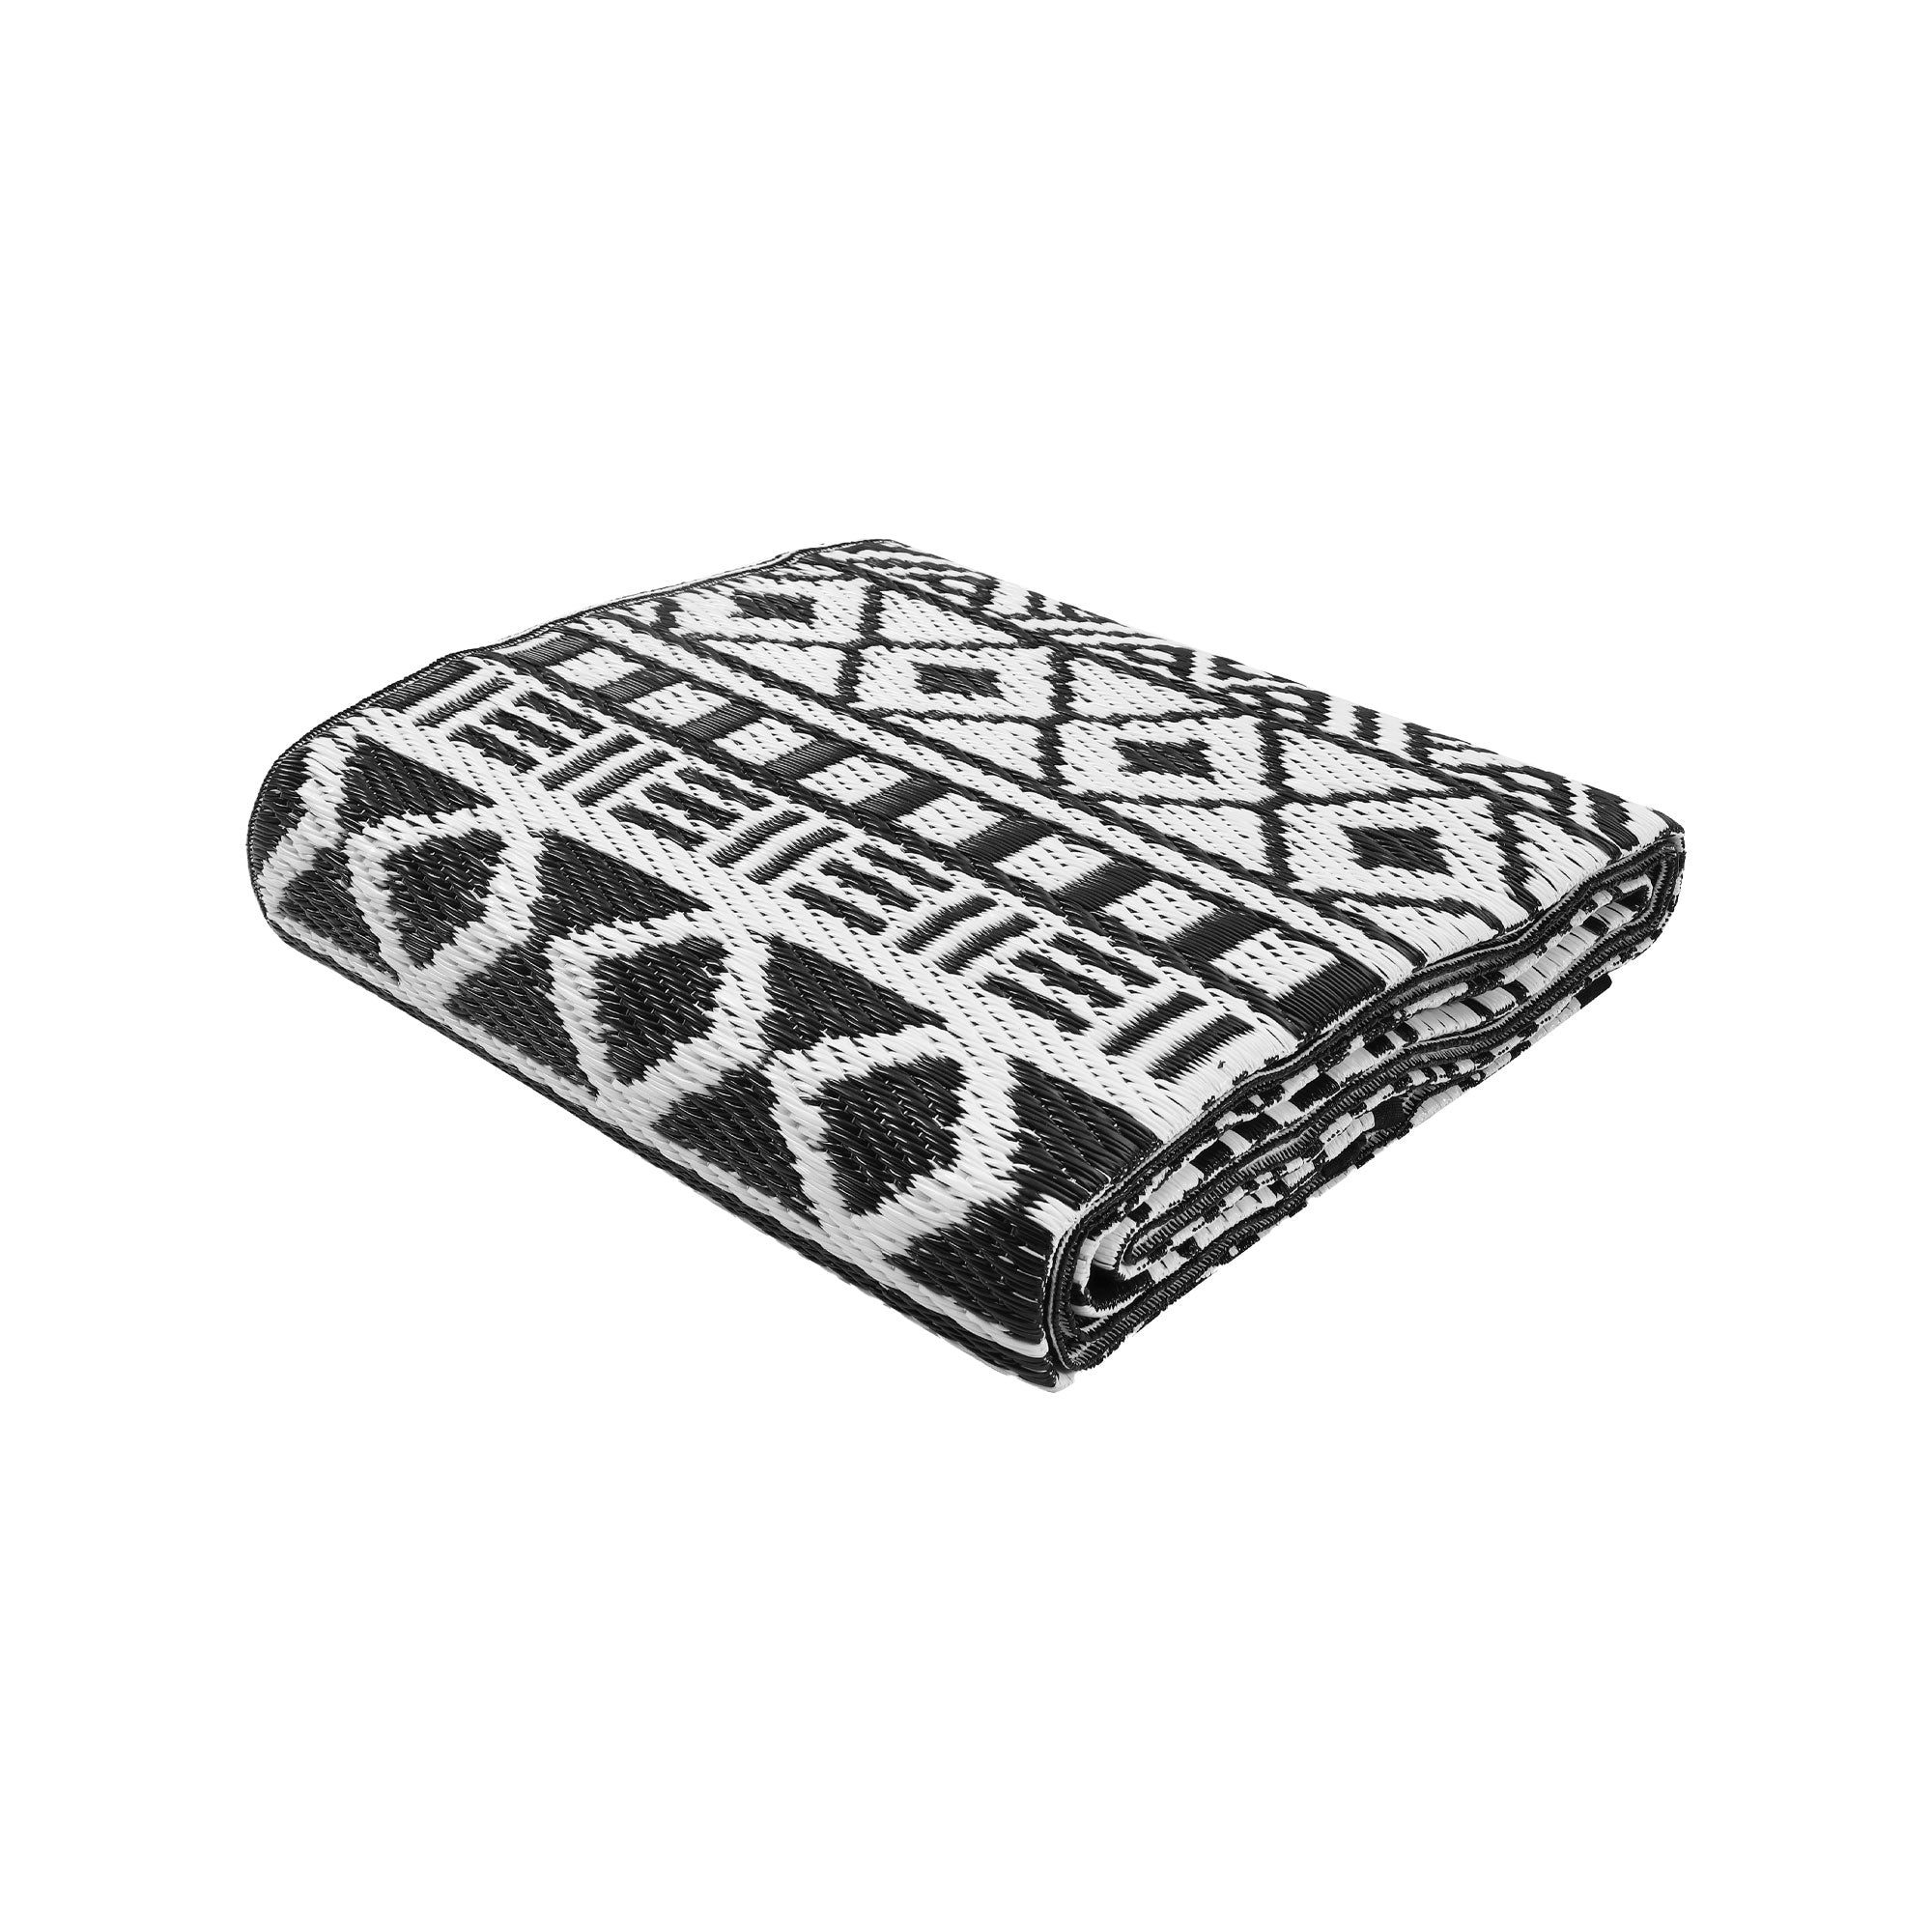 Relic Outdoor Recycled Plastic Rug for Camping (Black / White)